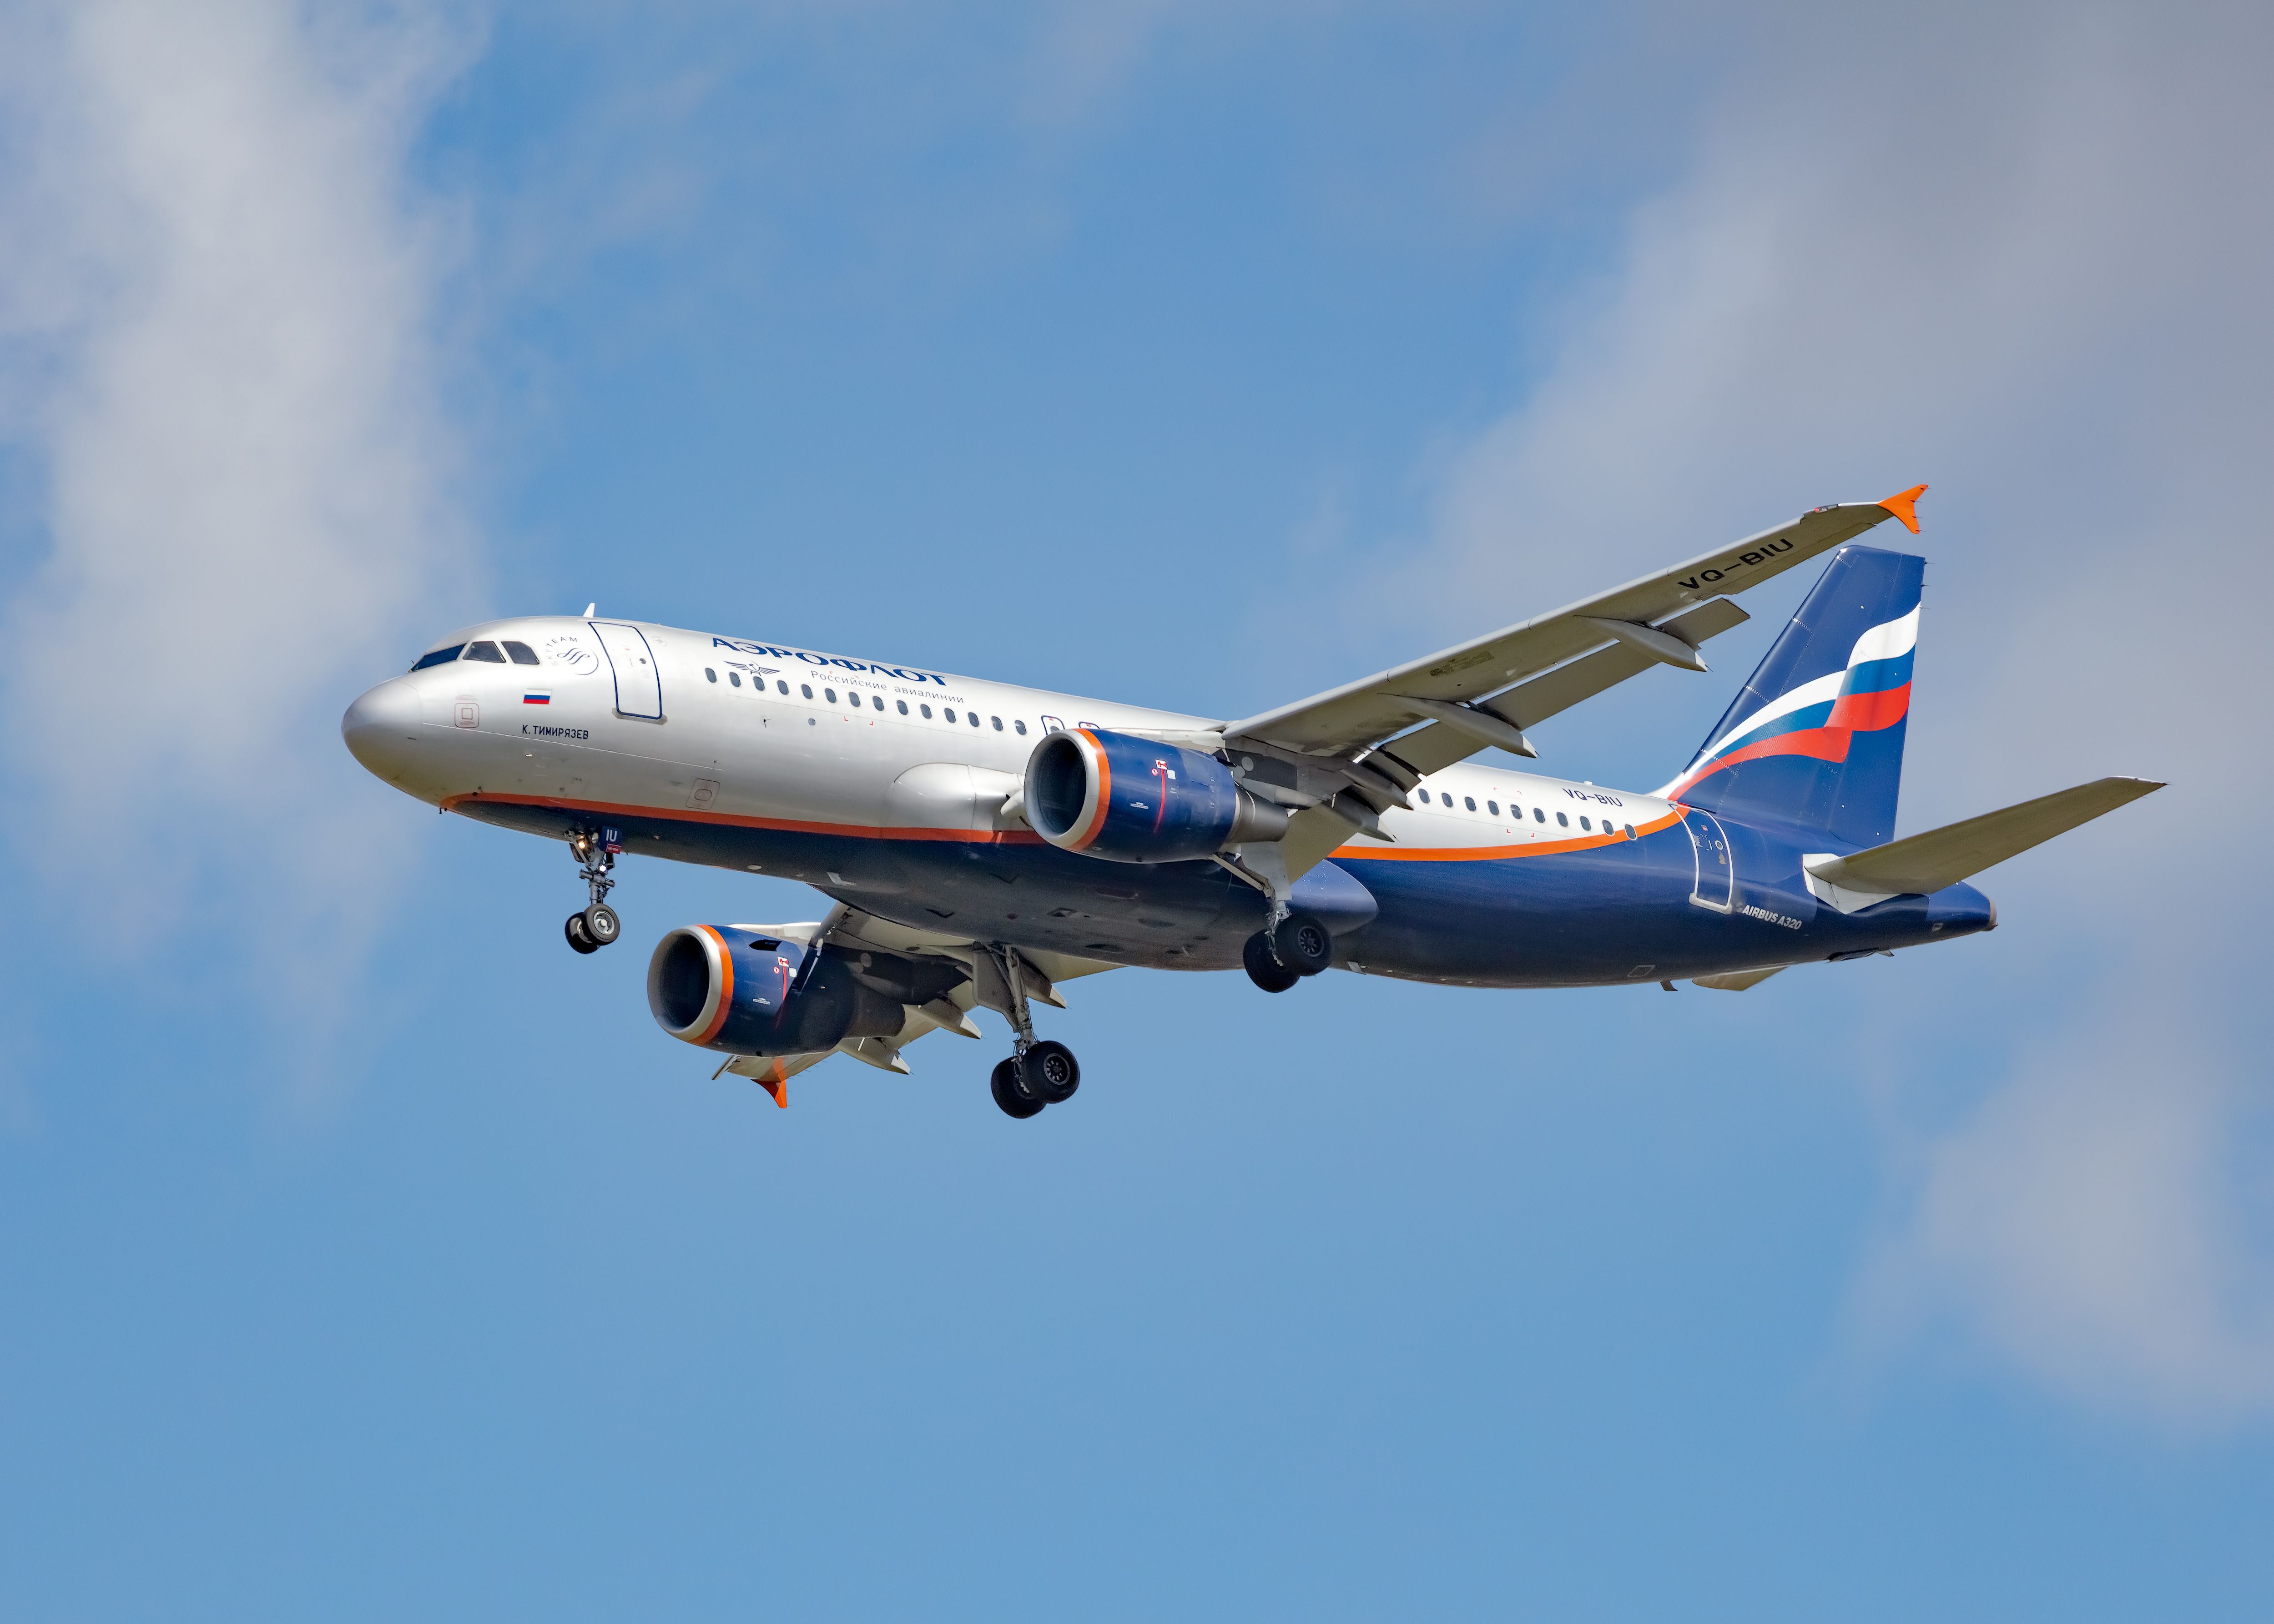 Hungary Launch Report On 2019 Aeroflot Airbus A320 Smoke In Cabin Incident